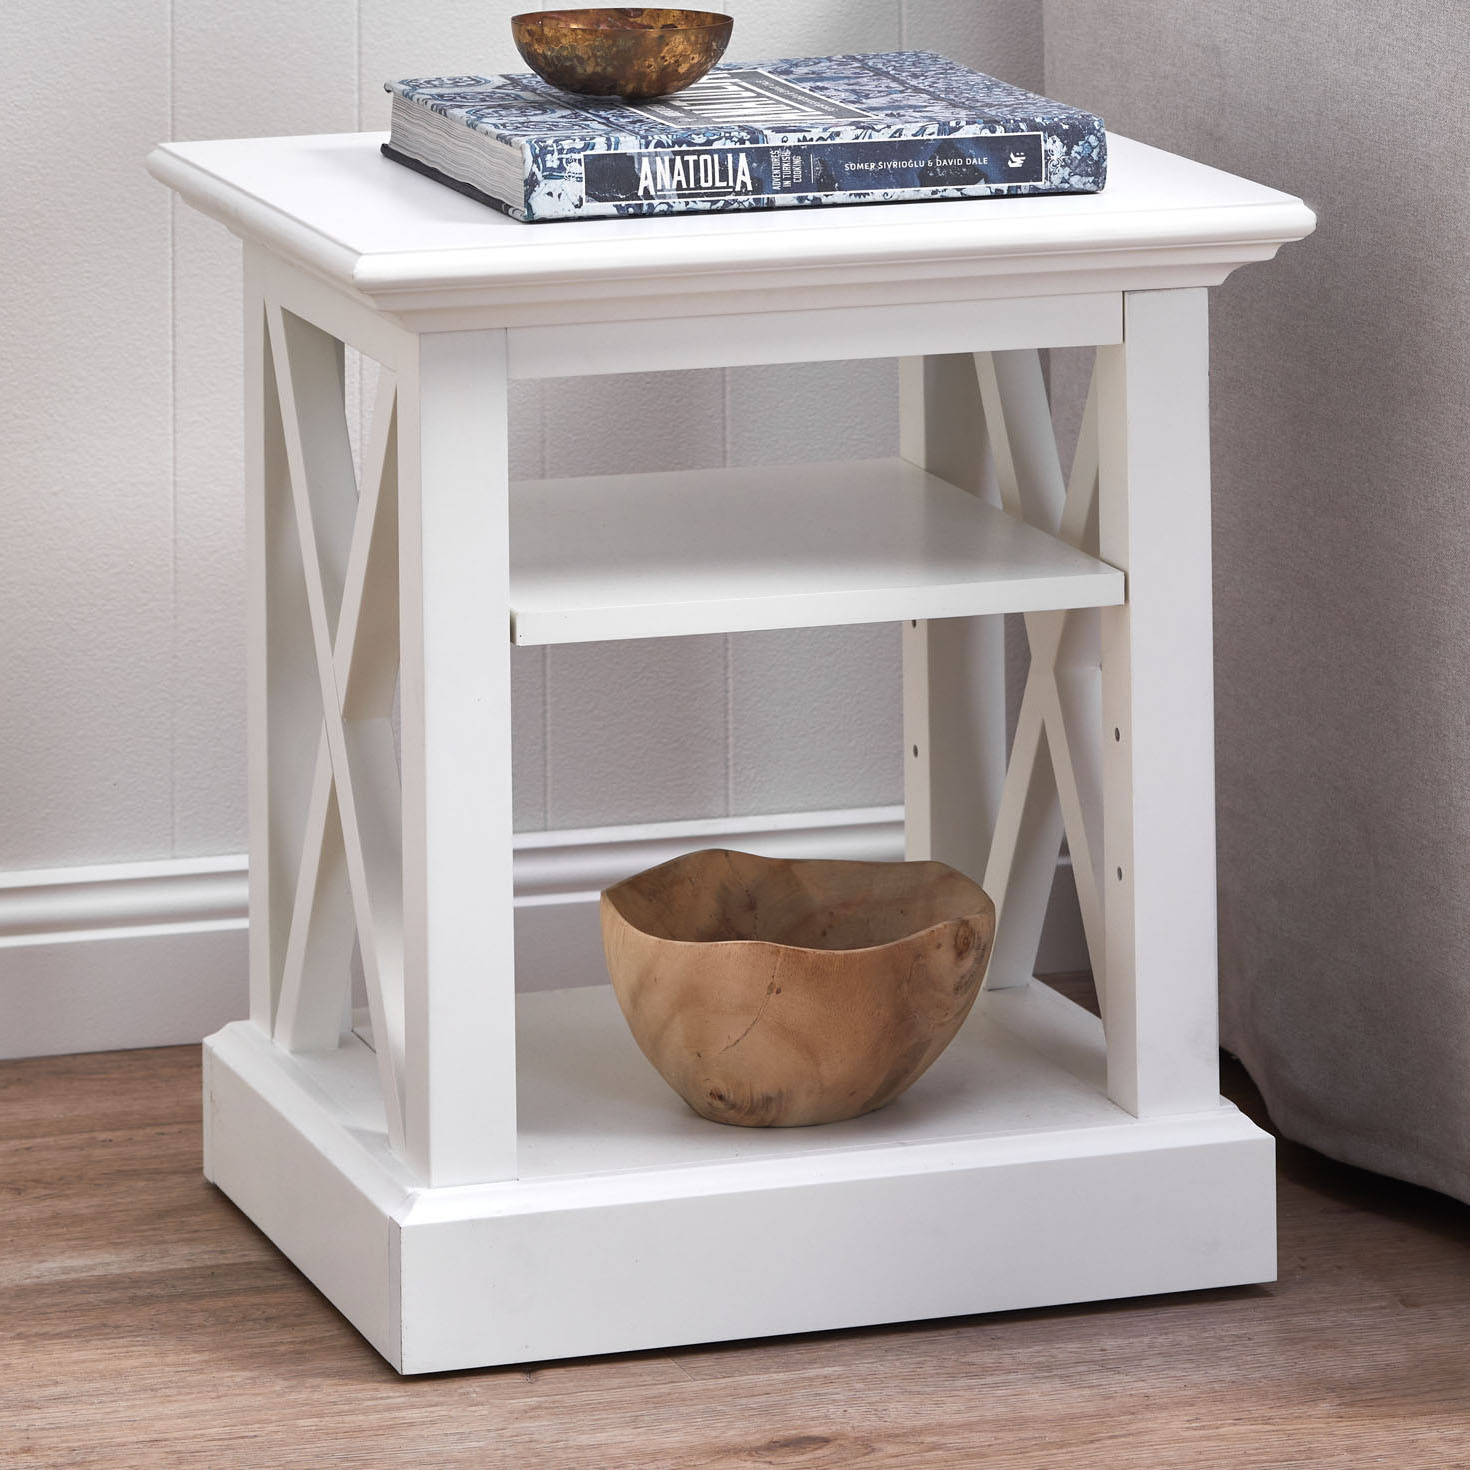 Temple Webster White Hamptons Side Table, Side Lamp Tables Australia